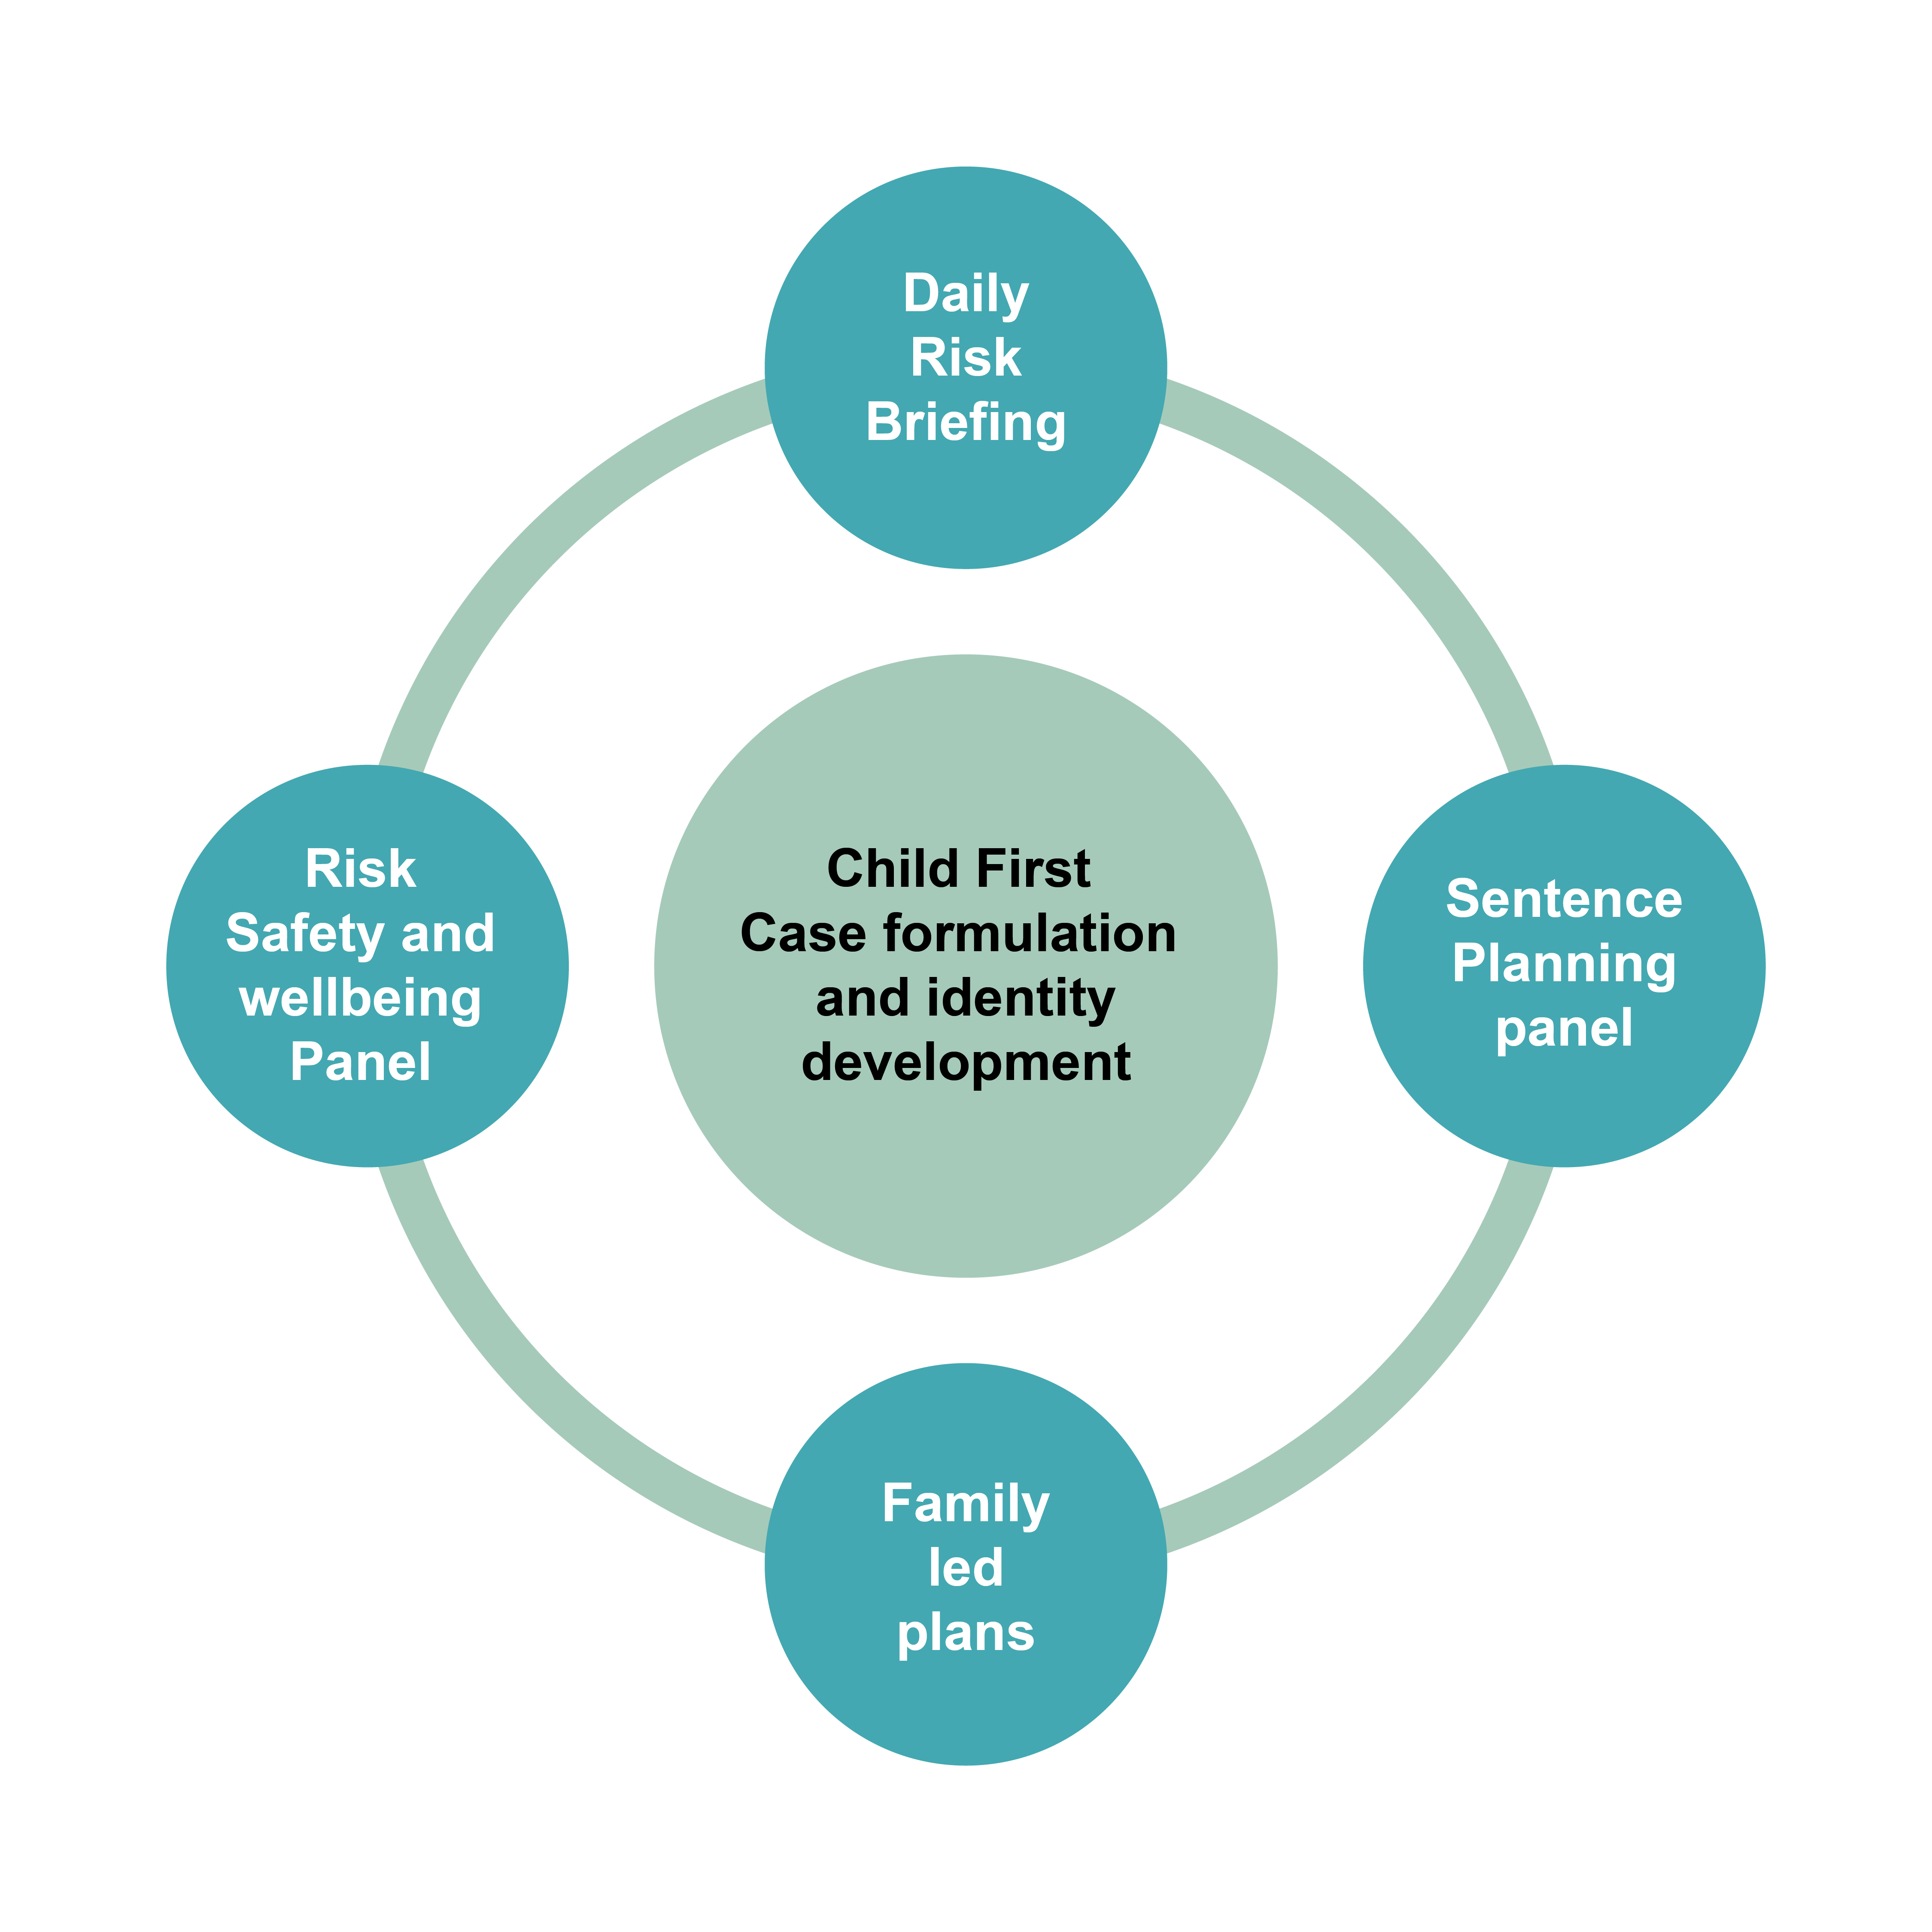 A  case formulation diagram with a light green circle at the centre with the text 'Child First Case formulation and Identity development' and four darker green circles around the outside linked together with the text in each: 'Daily Risk Briefing', 'Sentence Planning panel', Risk Safety and wellbeing Panel and 'Family led plans'